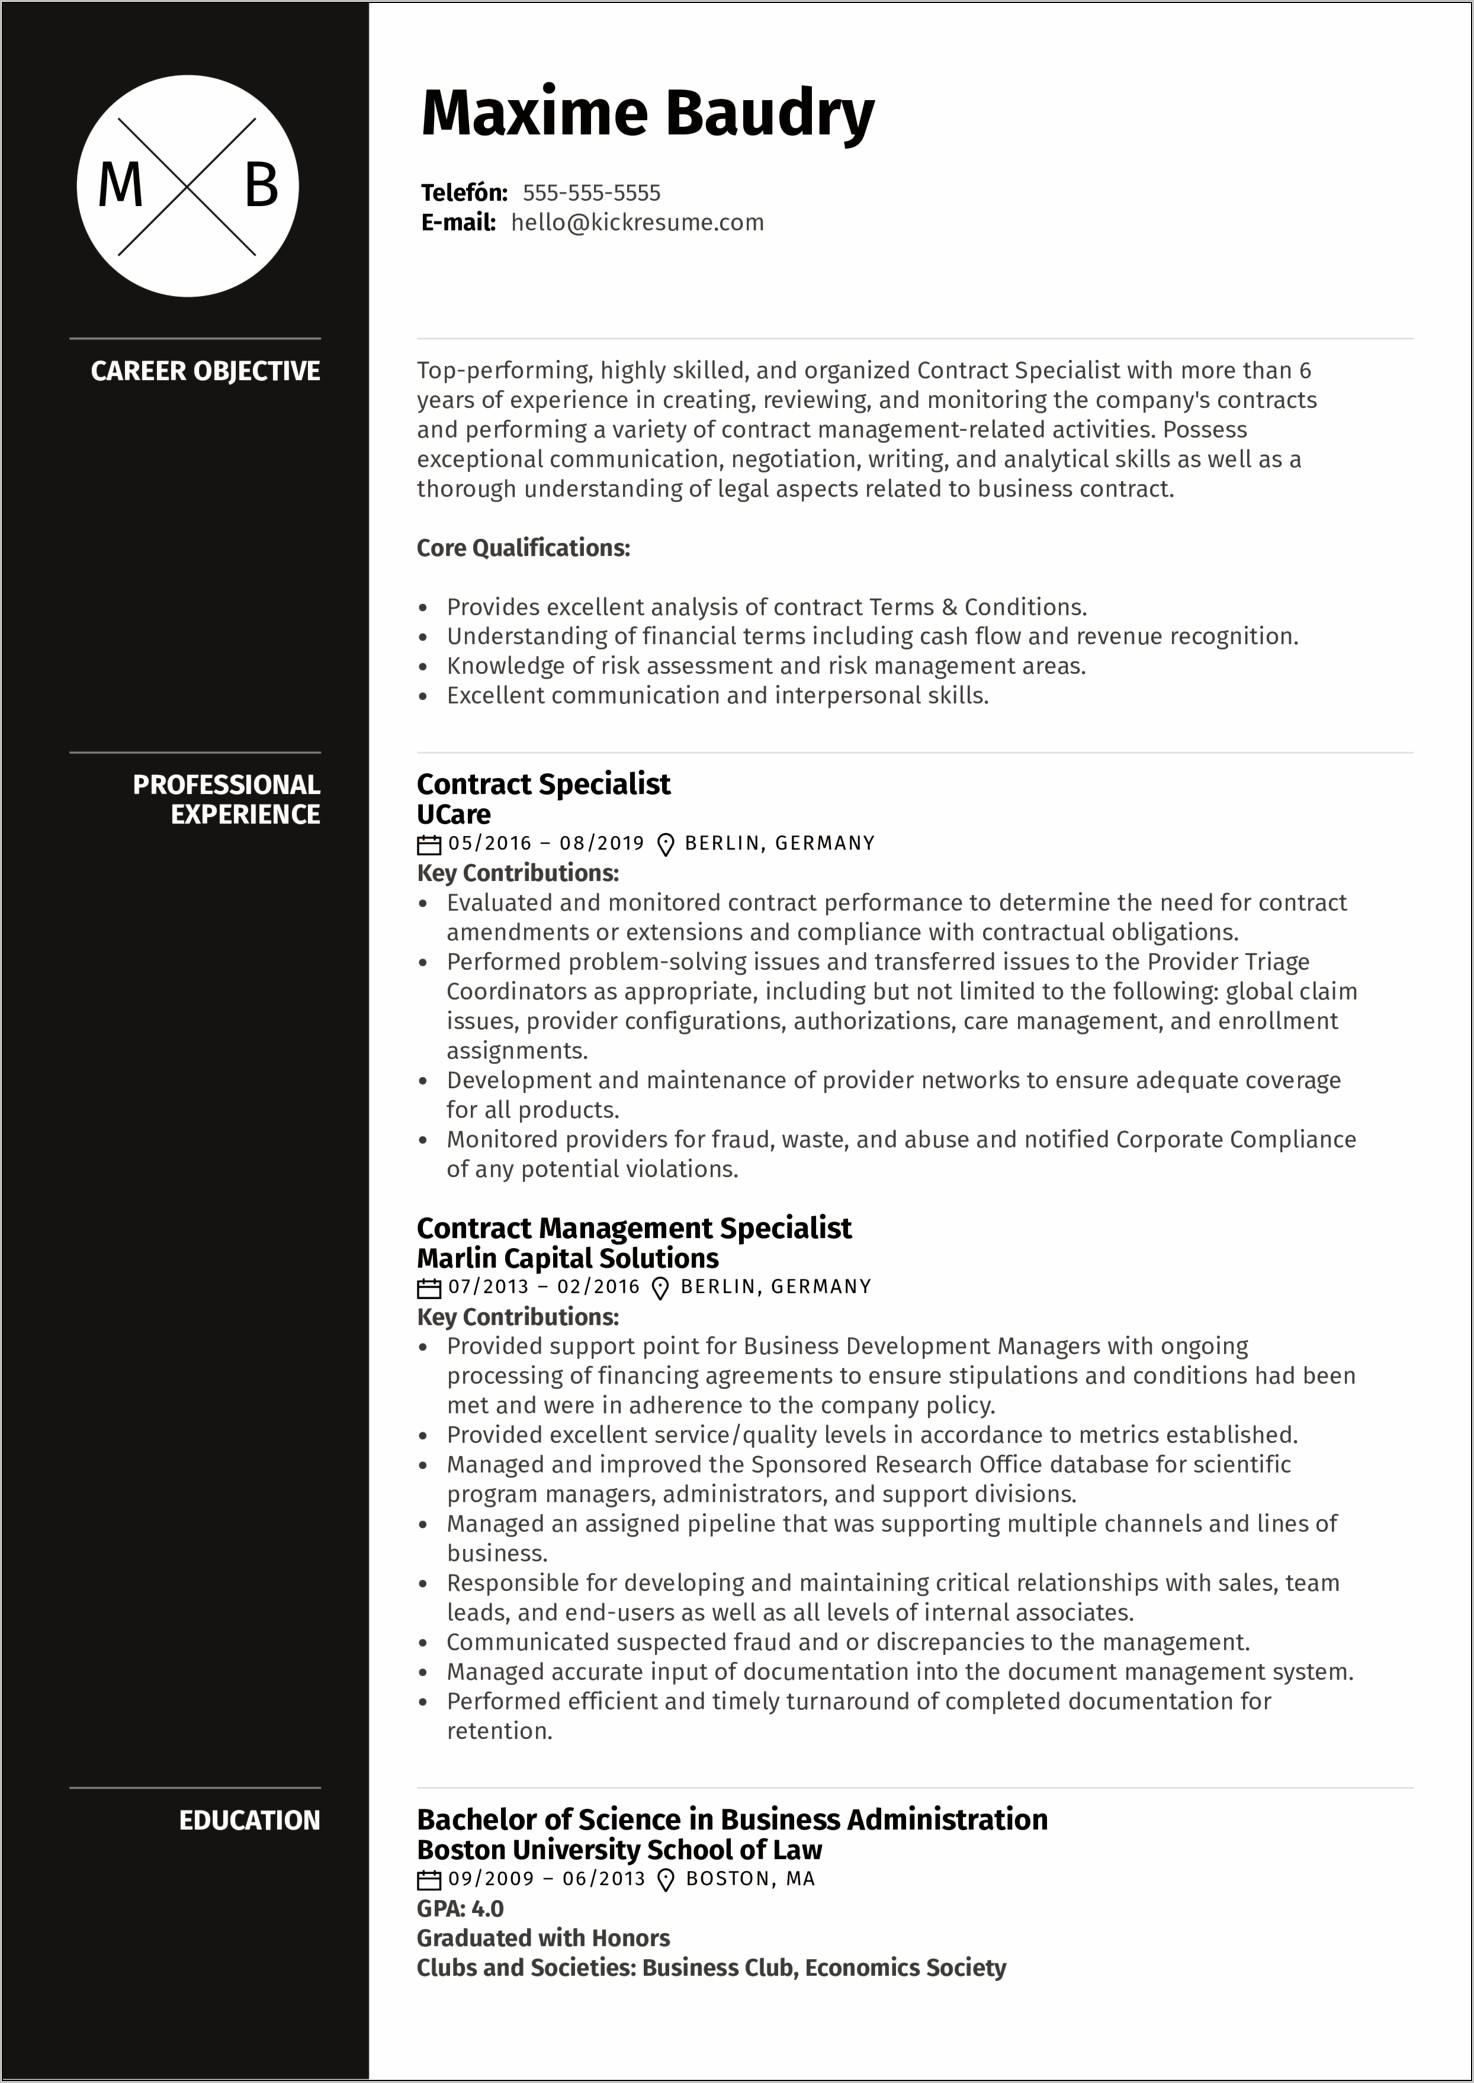 Resume Objective For Legal Contracts Specialist